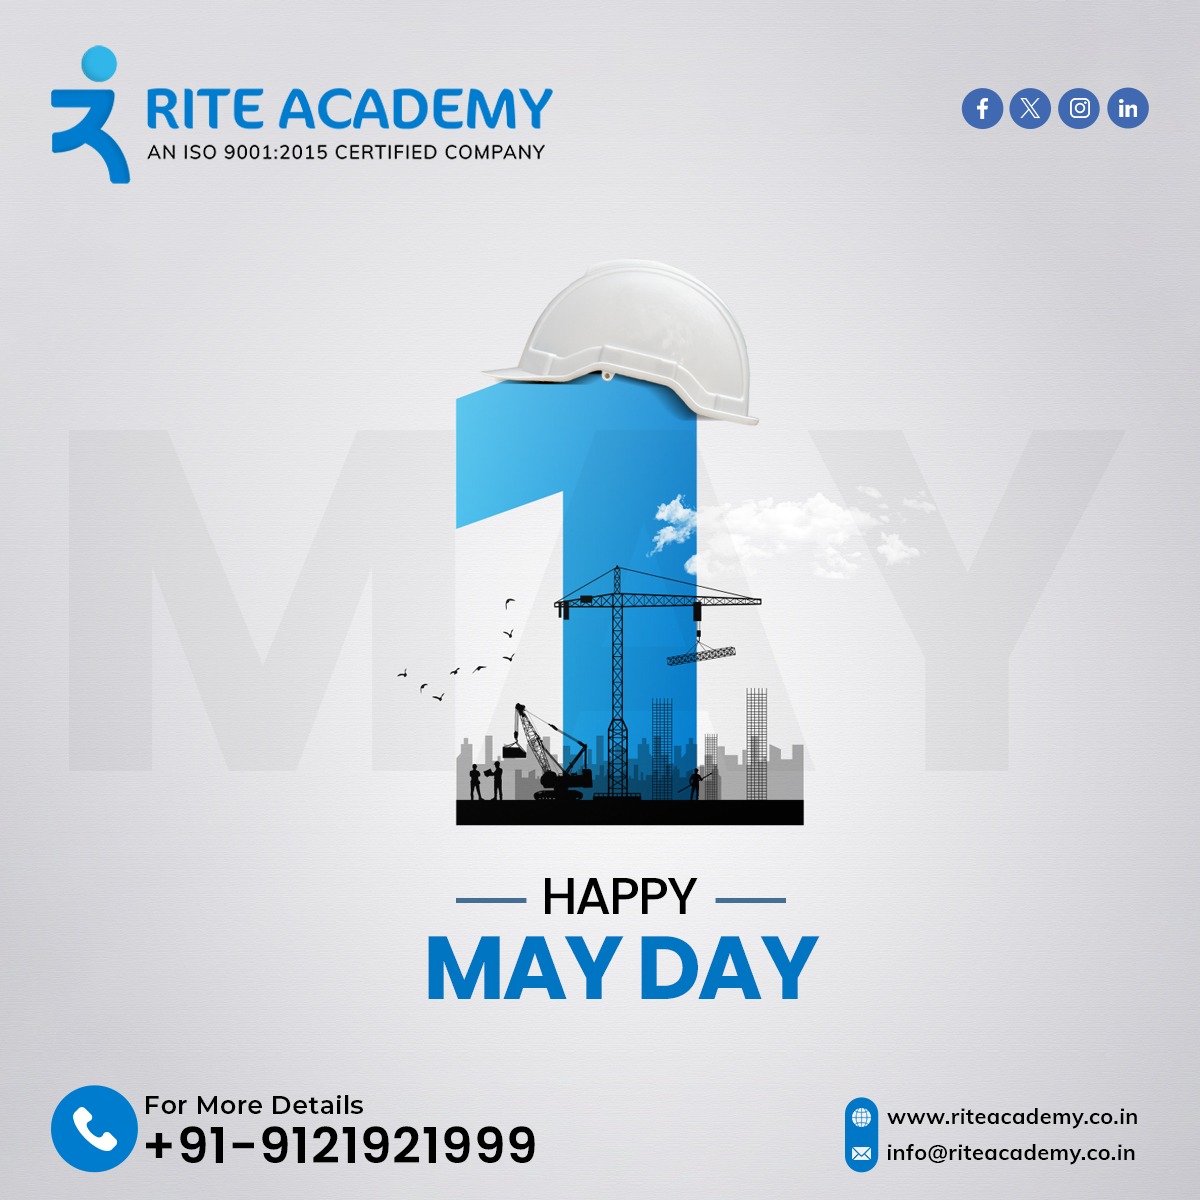 Celebrating the strength and dedication of workers everywhere! Happy Labour Day! 👷‍♀️👷‍♂️🎉

#LaborDay #MayDay #InternationalWorkersDay #WorkersDay #LabourDay #May1st #Solidarity #WorkersRights #MayDay2024 #LaborRights #CelebrateWorkers #MayDayCelebration #MayDayParade #RiteAcademy